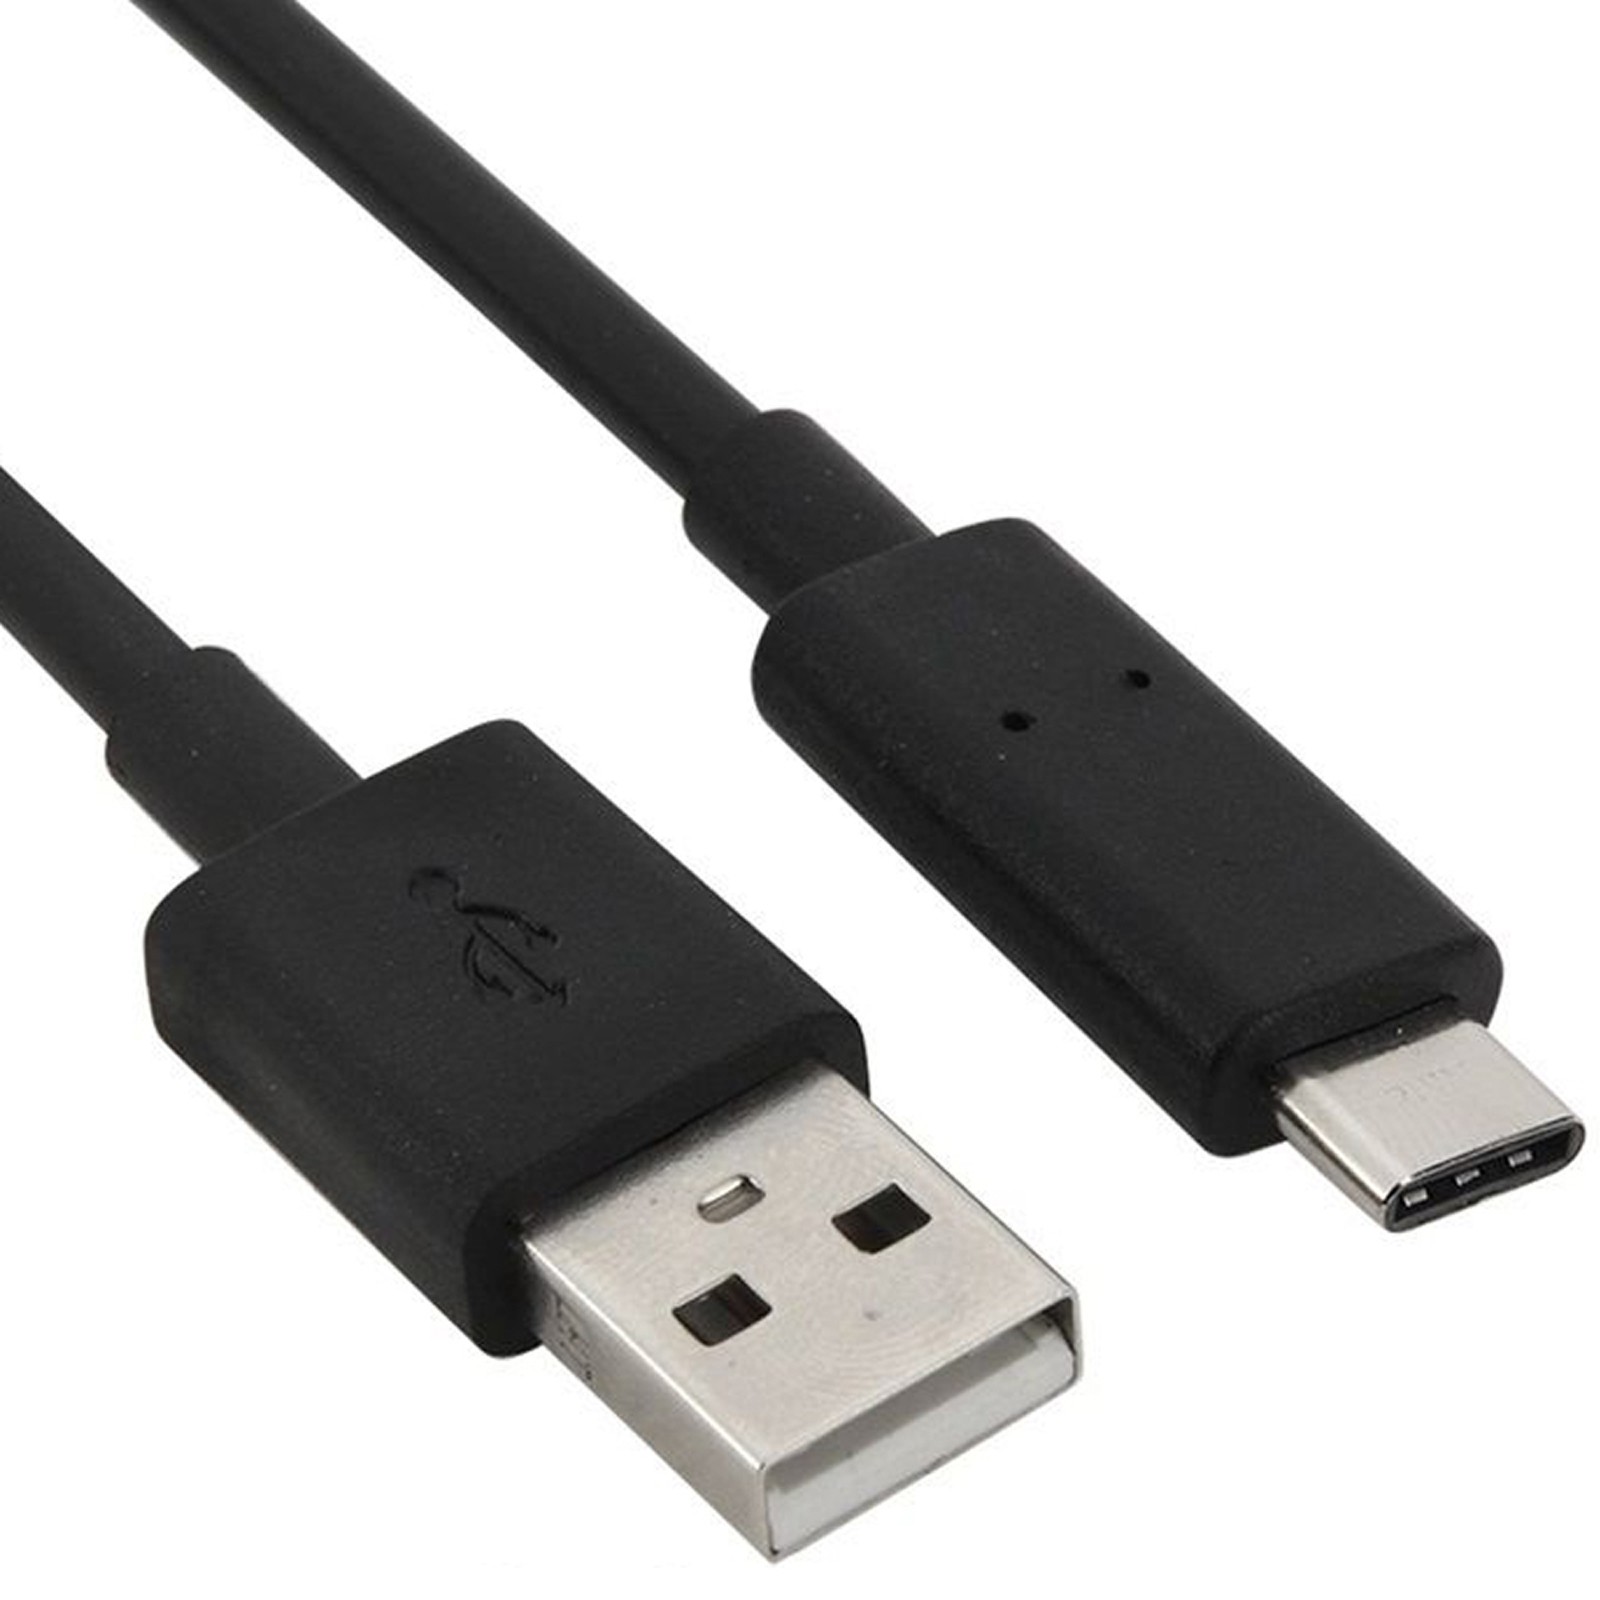 usb c to usb 2 cable